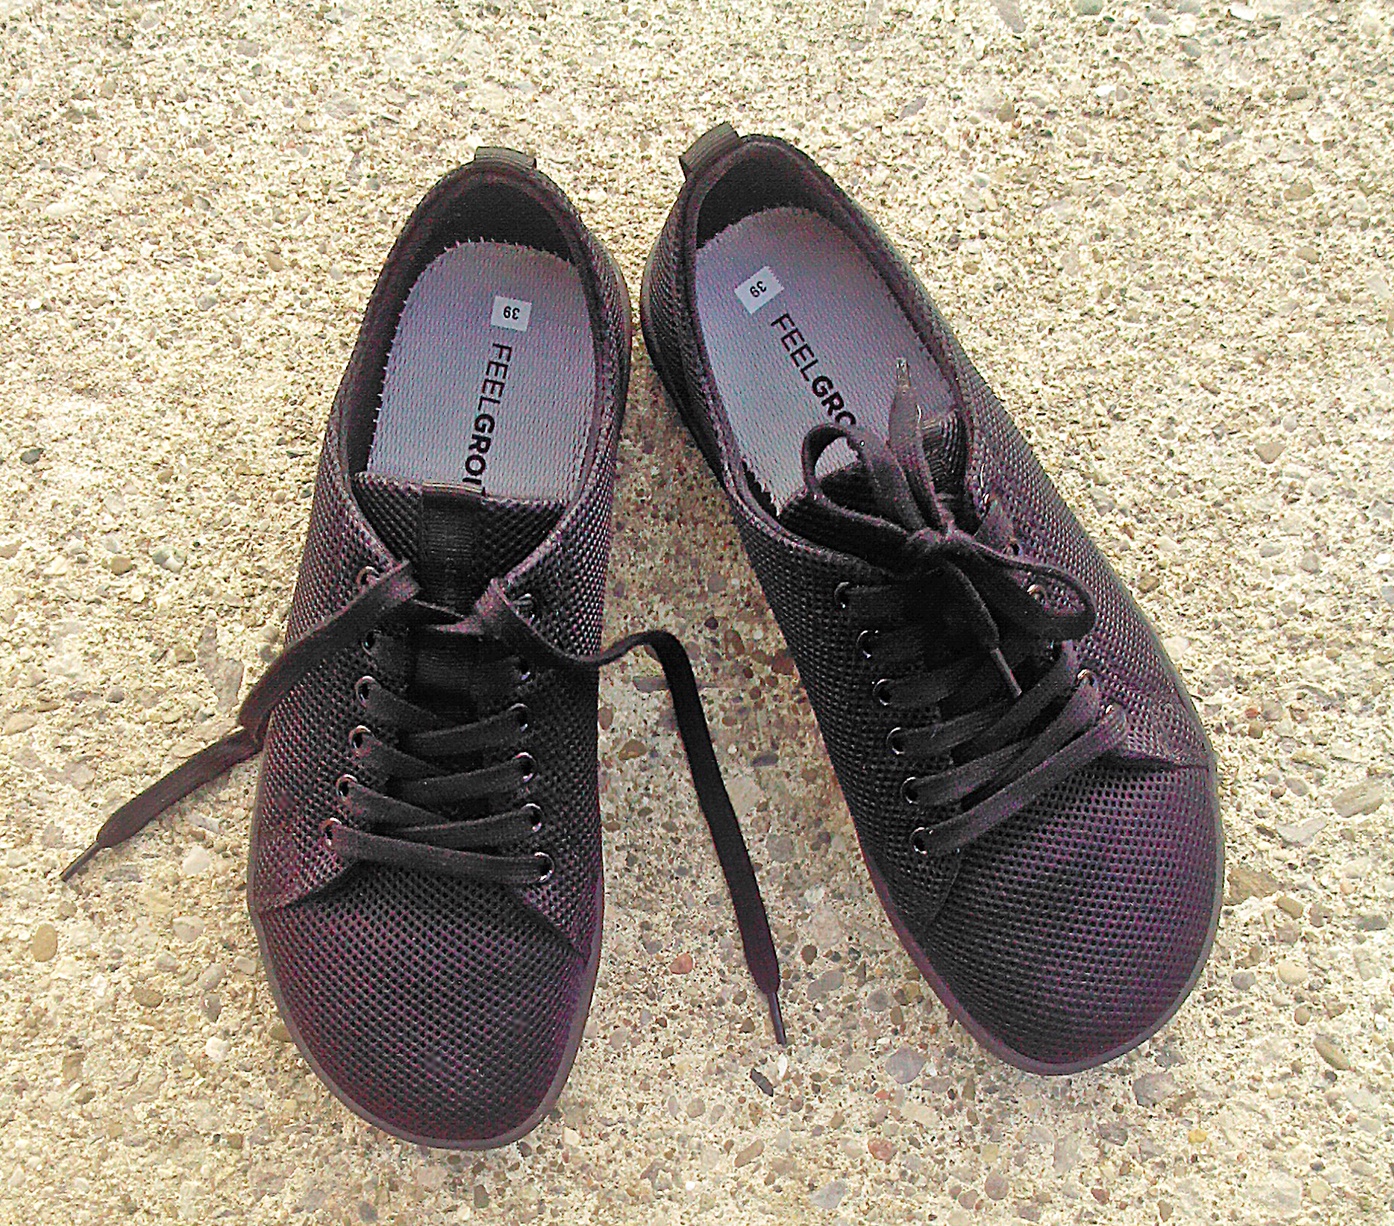 FeelGrounds Barefoot Casual Shoes Review